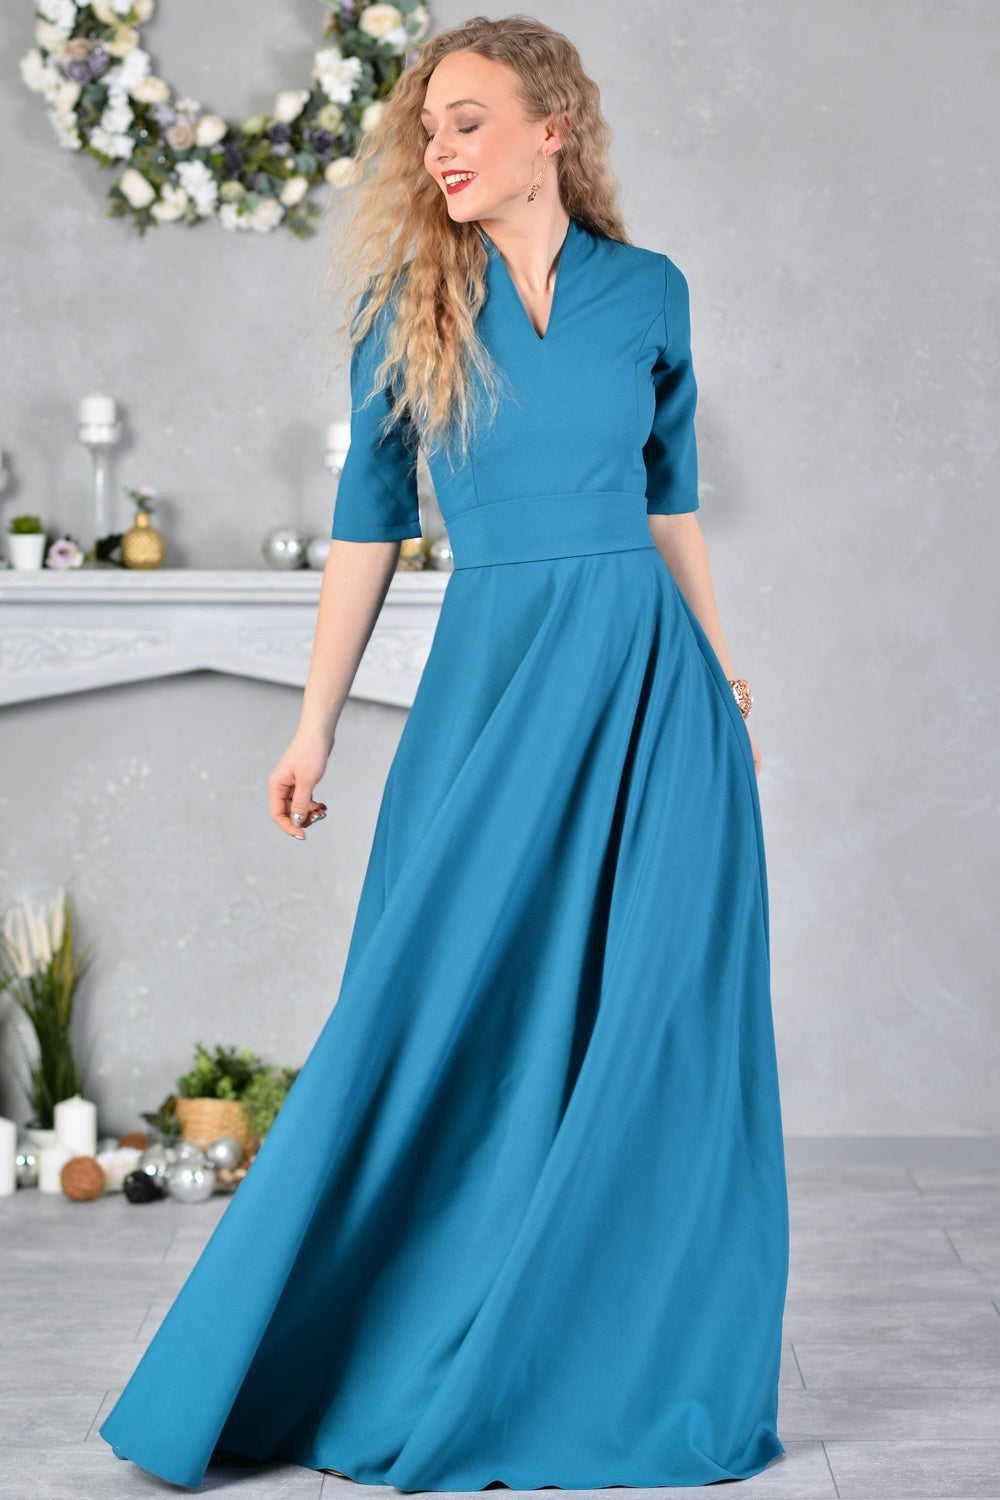 Blue green maxi dress with circle skirt and separated belt